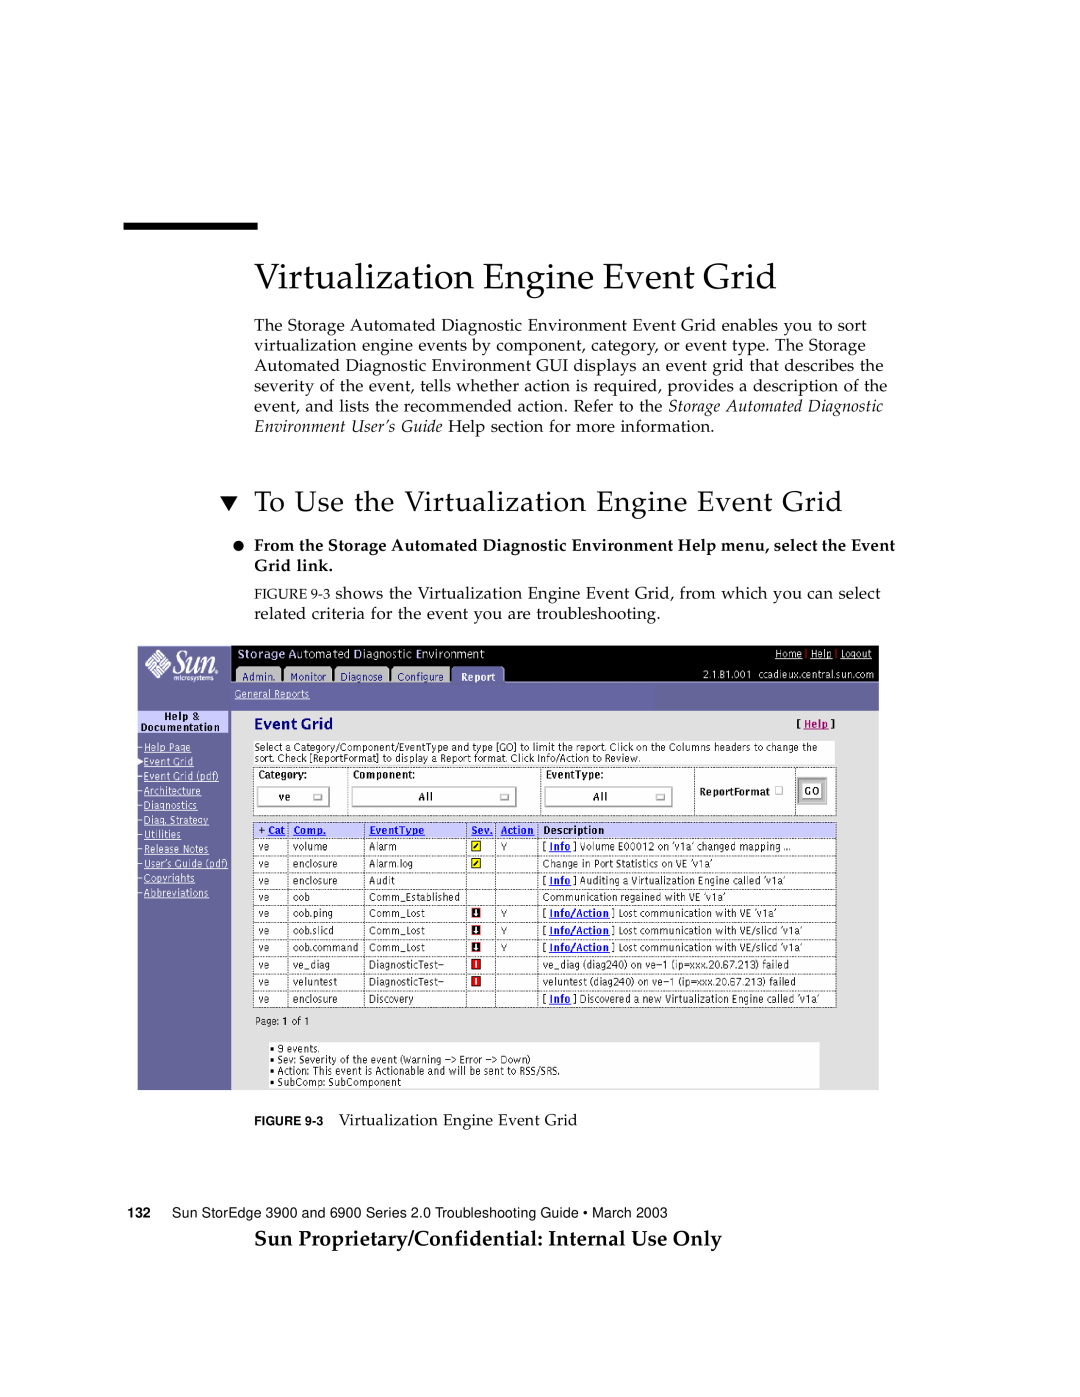 Sun Microsystems 3900 To Use the Virtualization Engine Event Grid, Sun Proprietary/Confidential Internal Use Only 